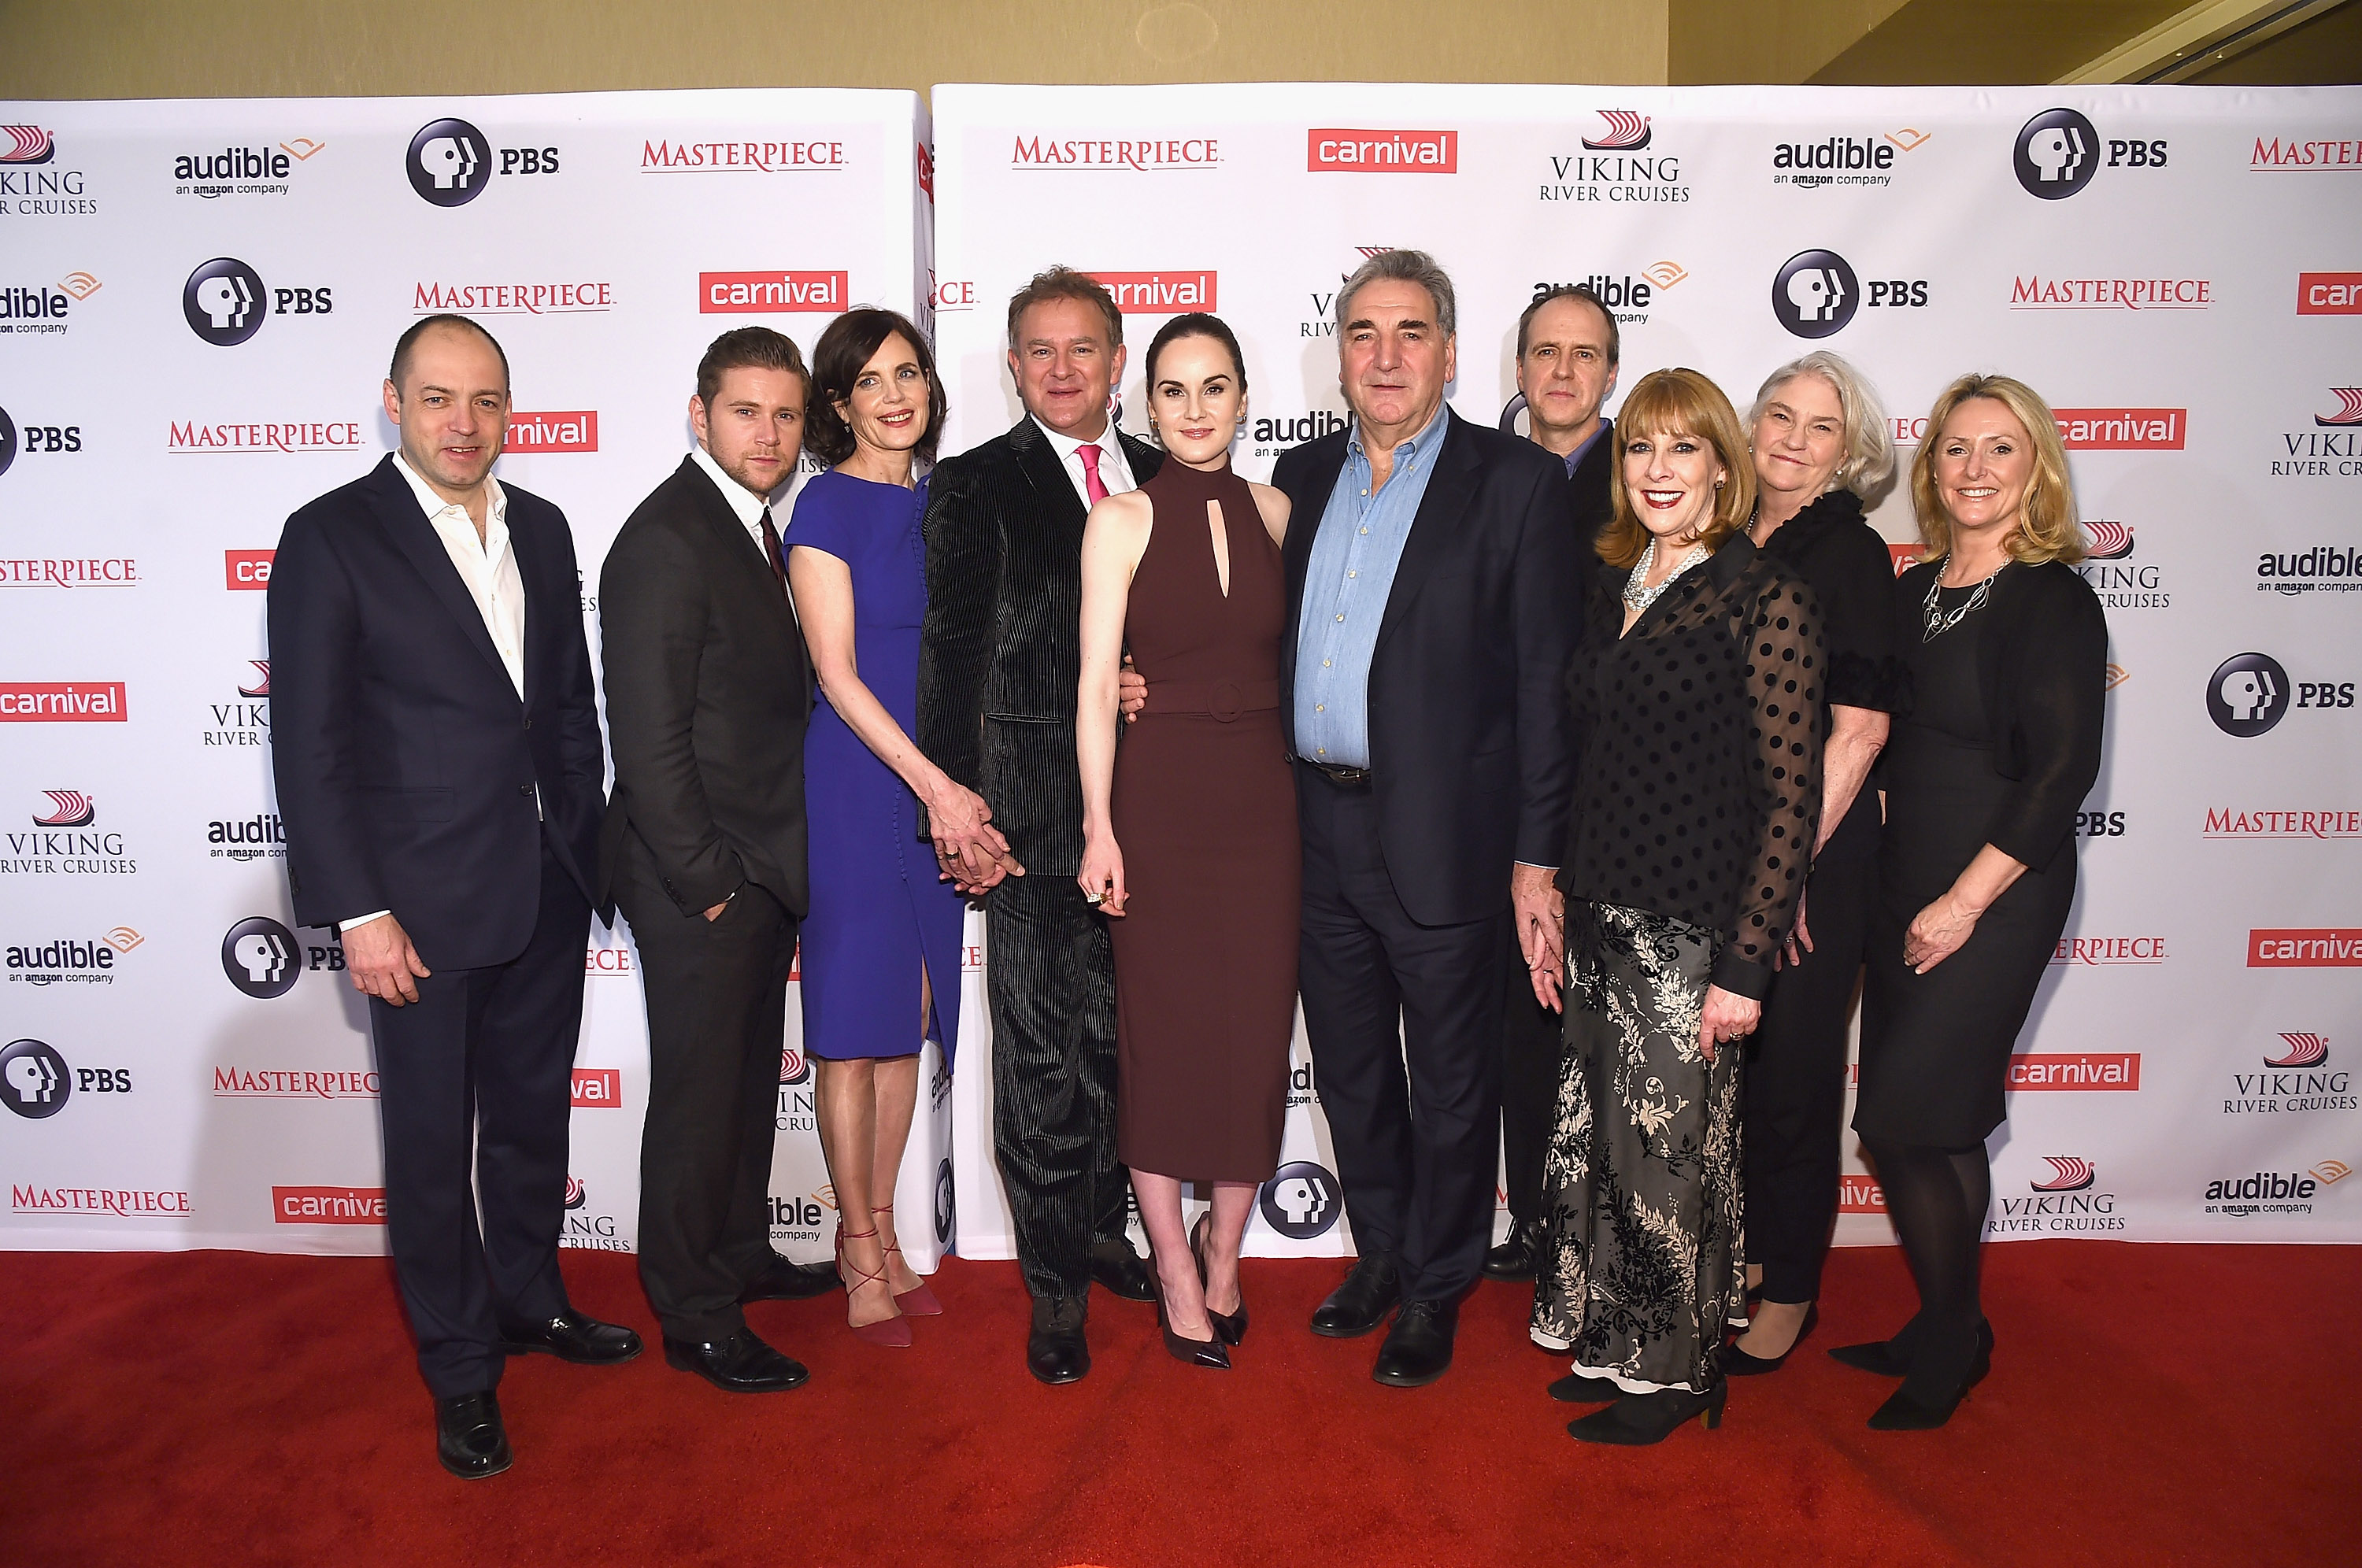 Downton Abbey cast and crew attend the 